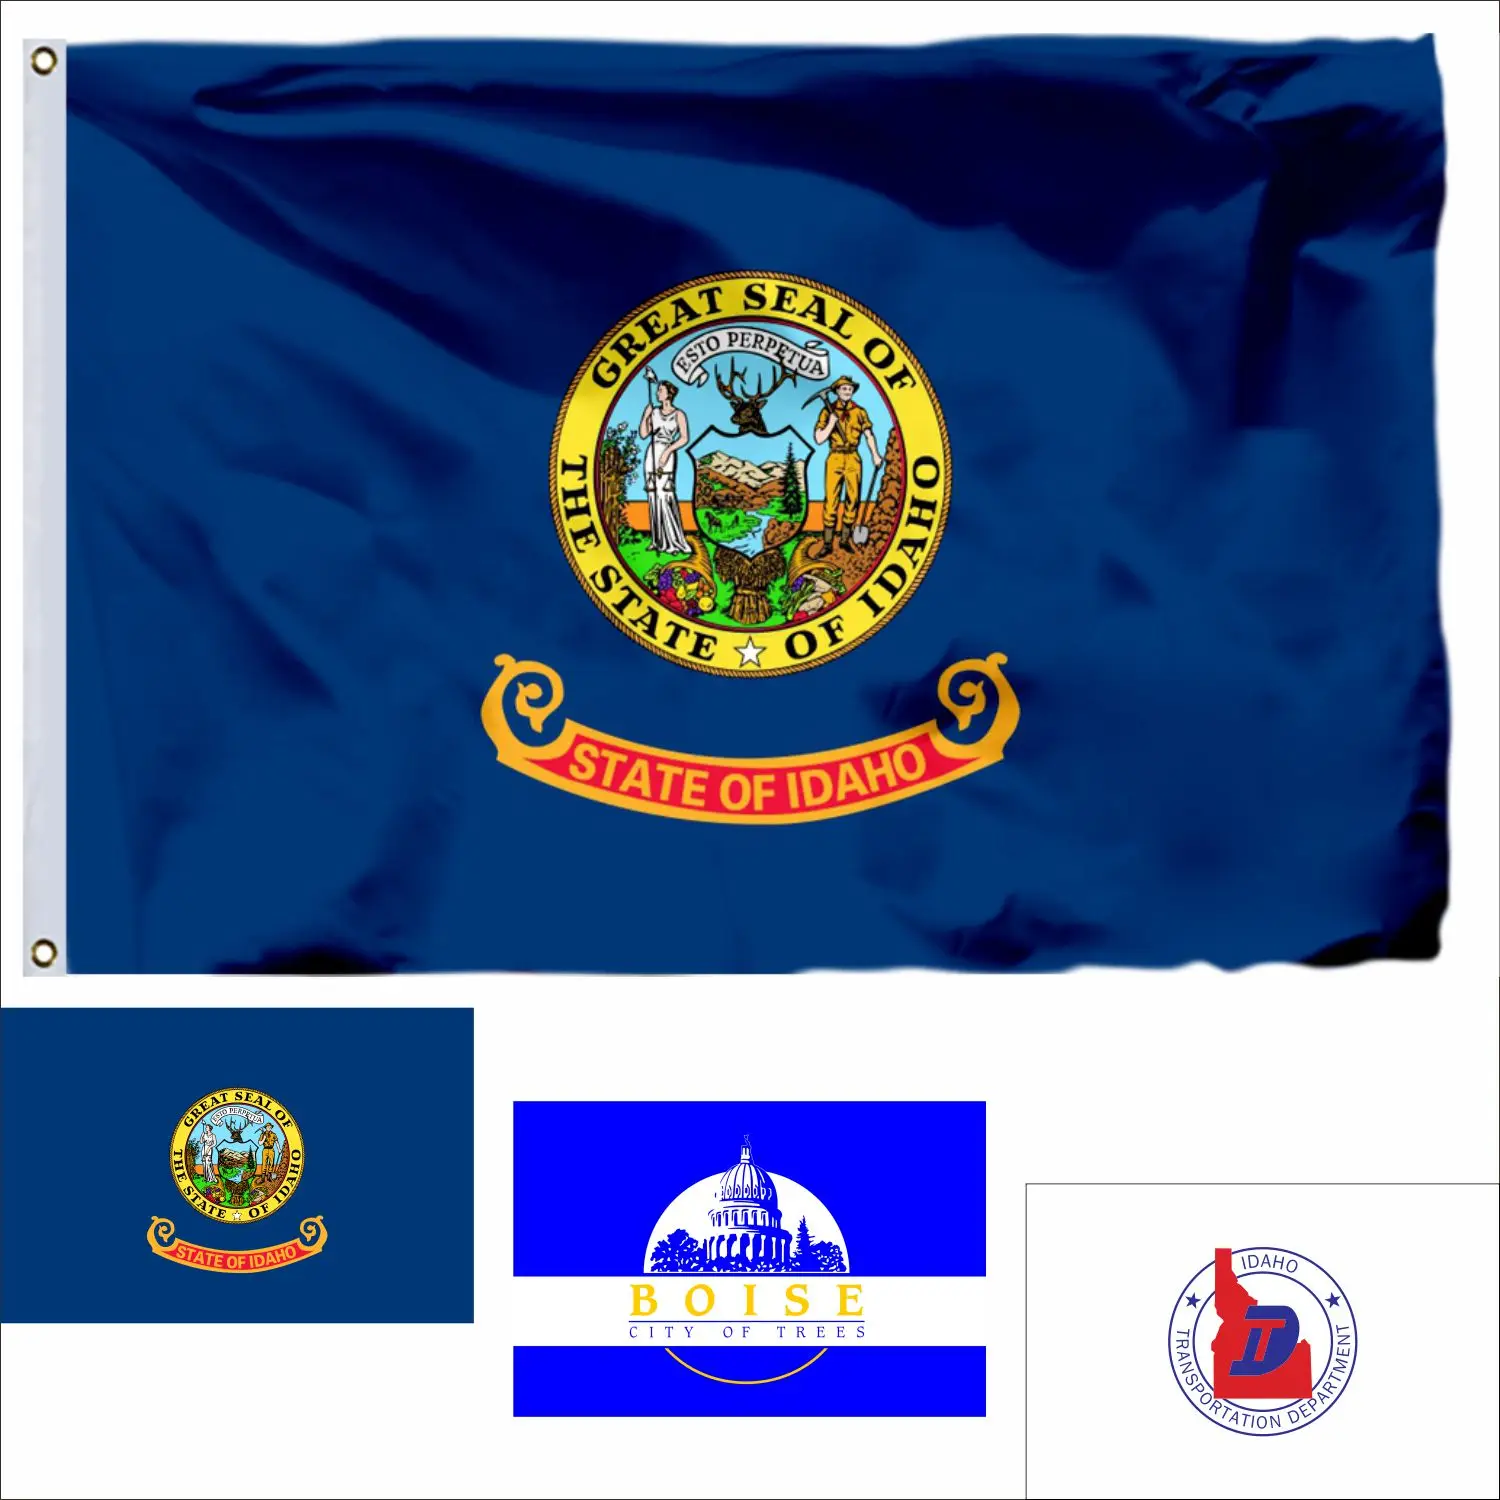 

USA Idaho Flag 90x150cm Boise 3x5ft US Guanica American United States Flags and Virgin Islands Banners